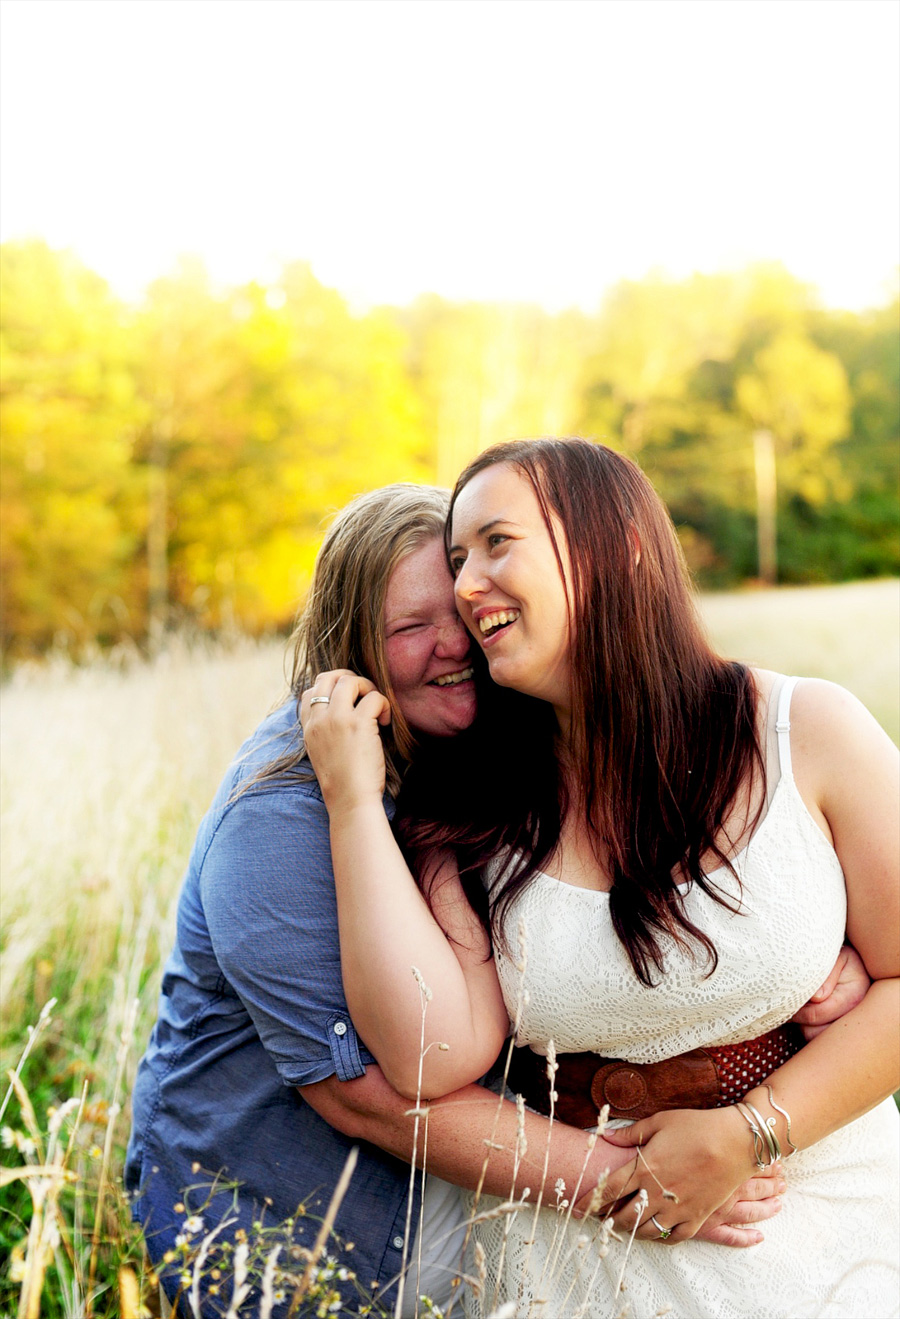 Alisa & Kim were SO happy during their shoot -- can't resist the adorableness!